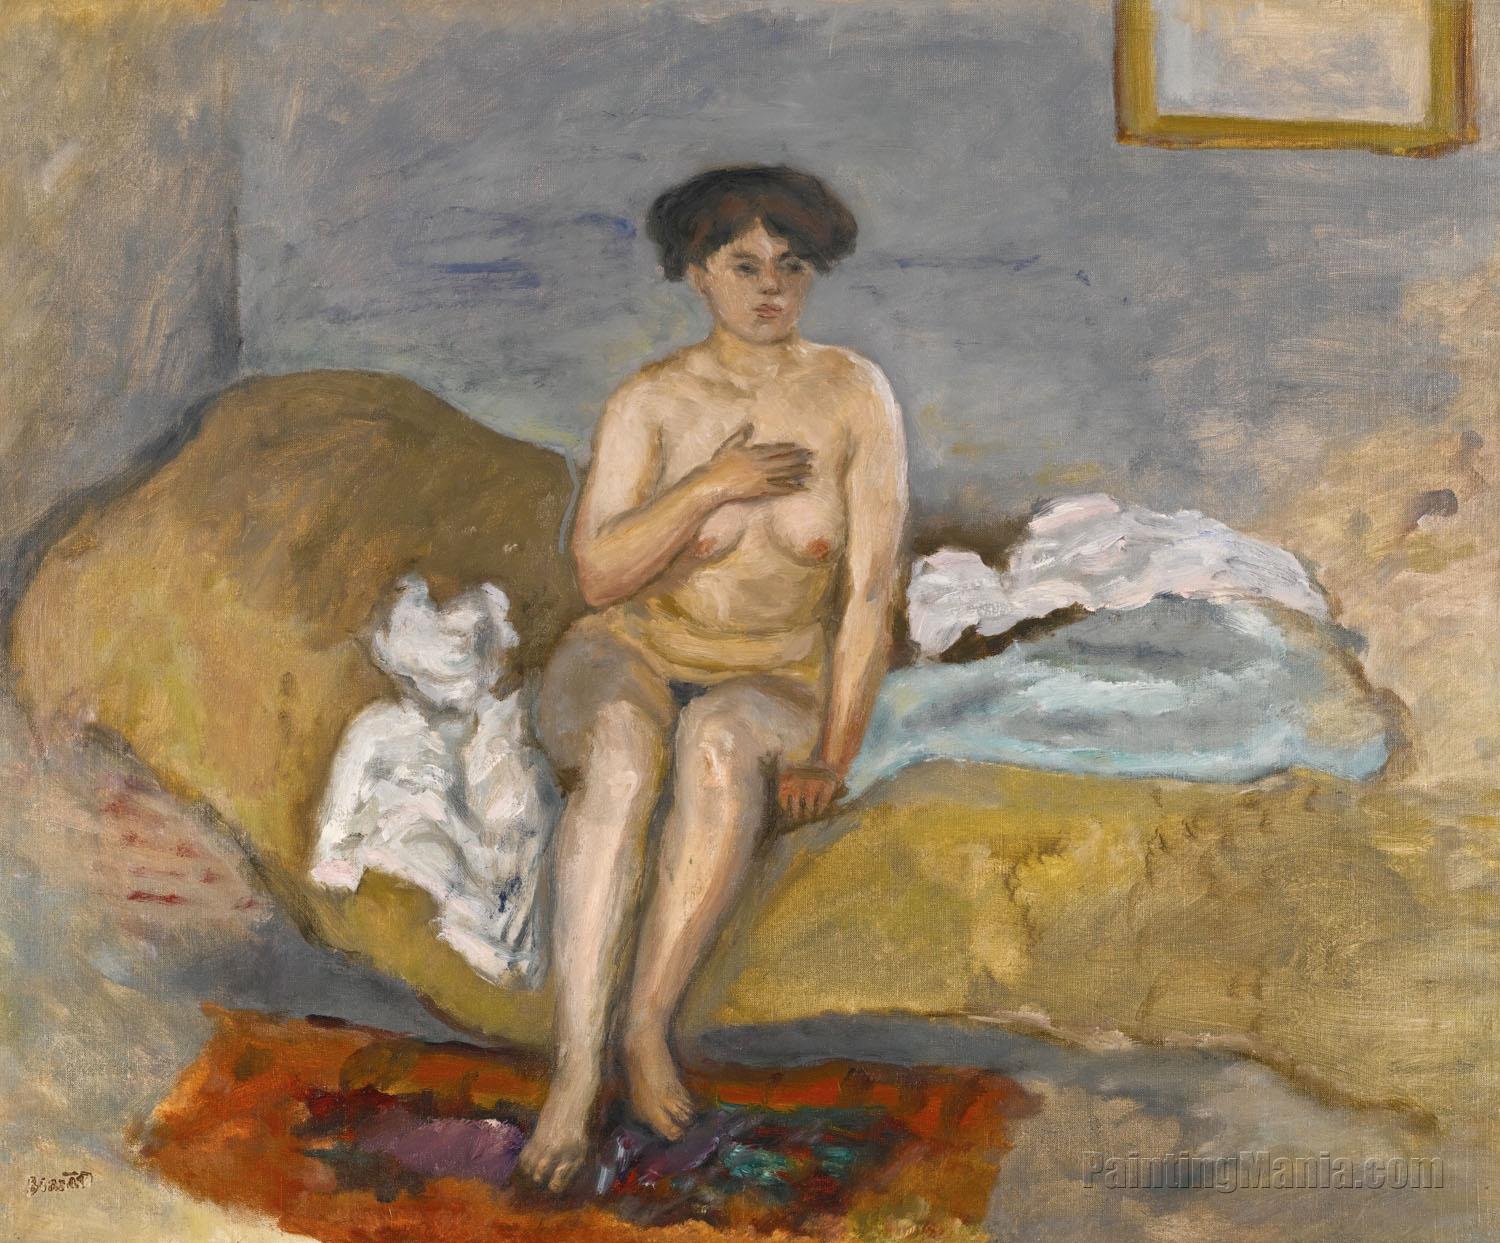 Naked Woman Sitting on a Couch